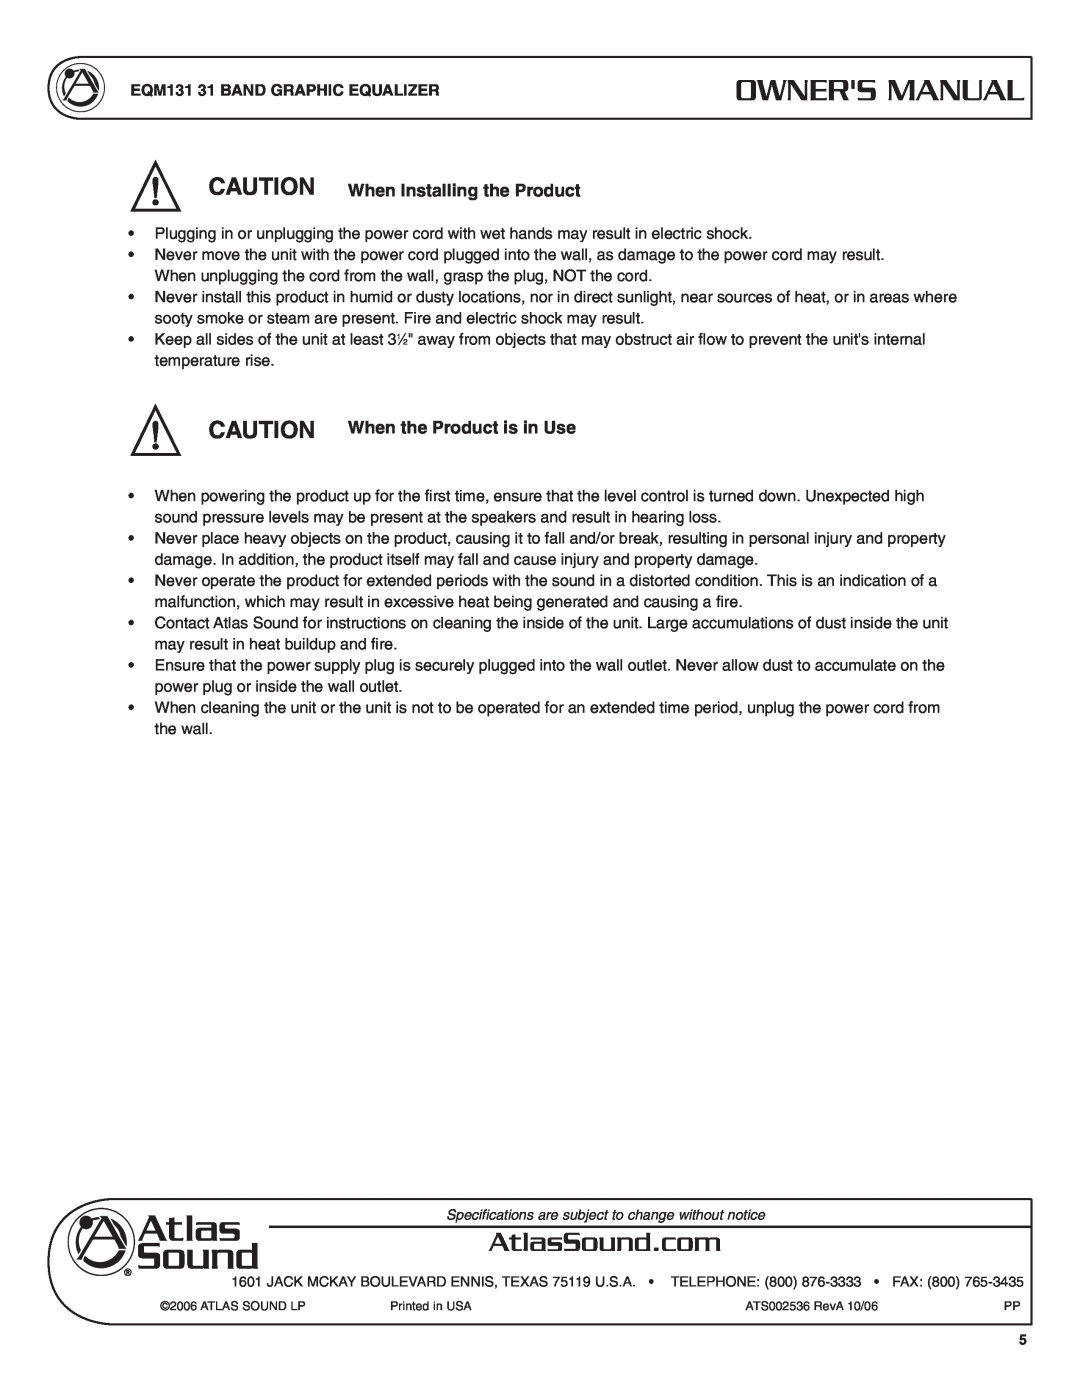 Atlas Sound EQM131 specifications CAUTION When Installing the Product, CAUTION When the Product is in Use 